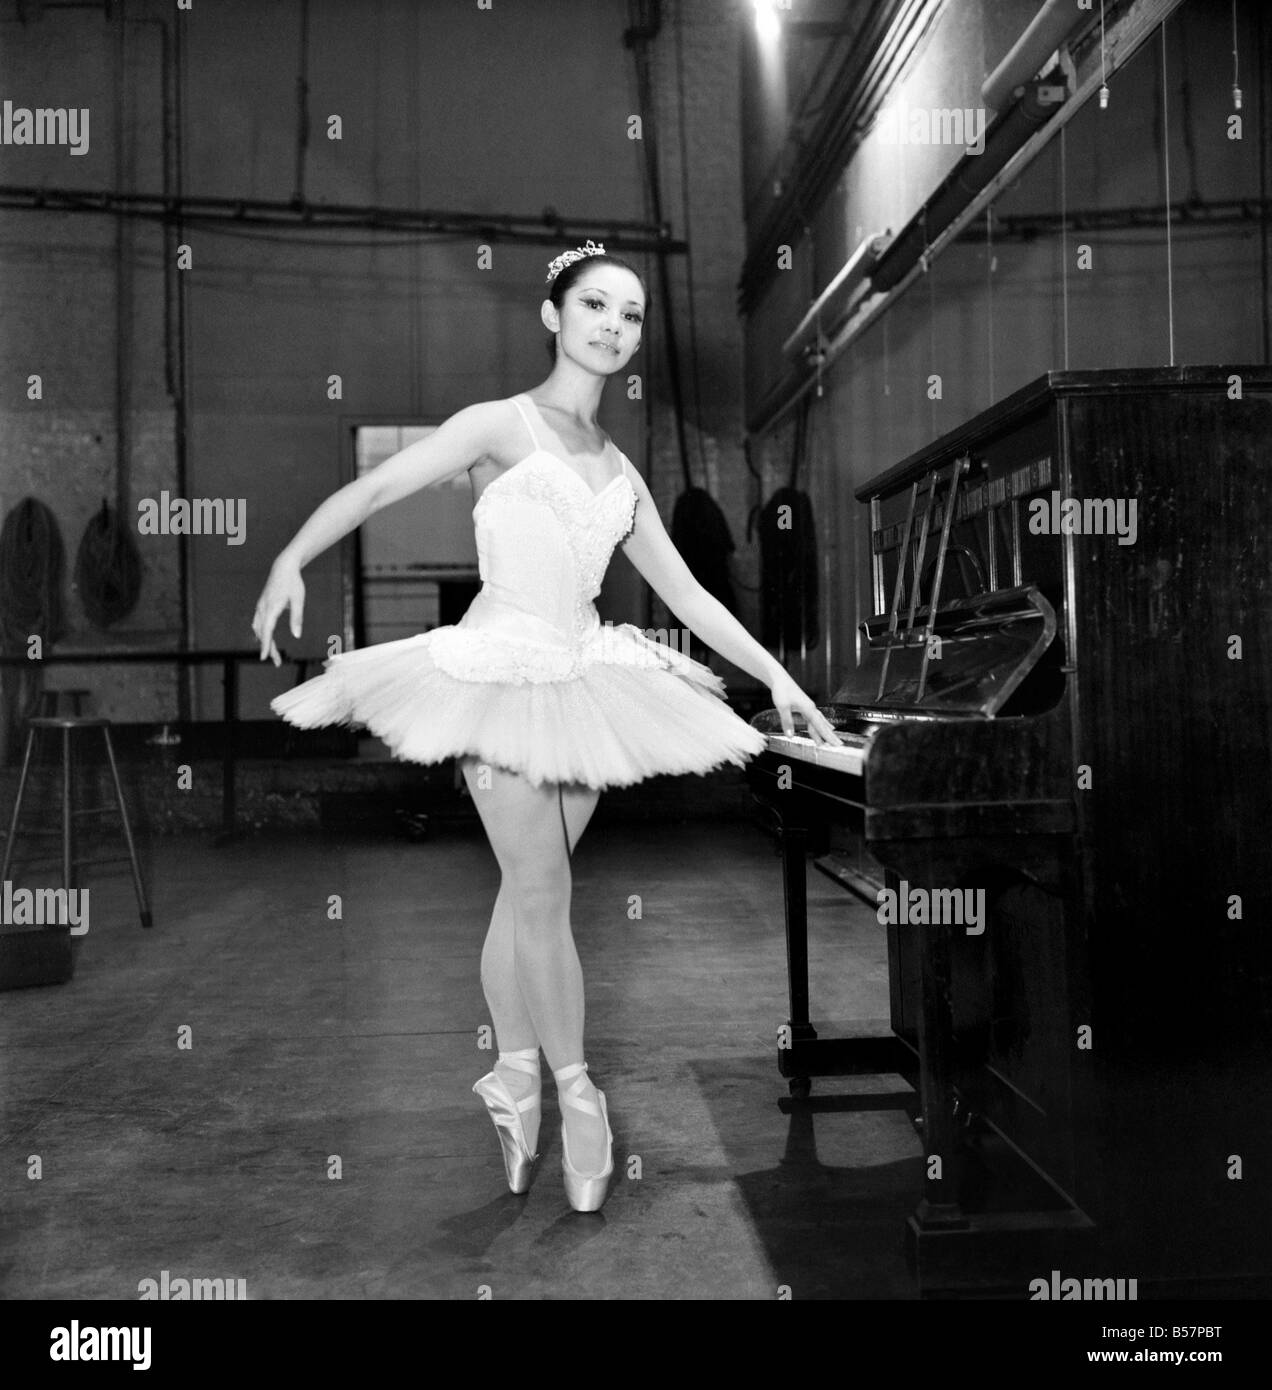 Japanese Ballet Dancer: Noriko Ohara. Four feet ten inches tall, and weighing under seven stone this girl has come a long way to join the world of ballerinas in London. She is petite Norikpo Ohara of the Japanese balet who is rehearsing in London to take the leading role in Coppelia with the London Festival Ballet in London later in the month. January 1975 75-01174-003 Stock Photo